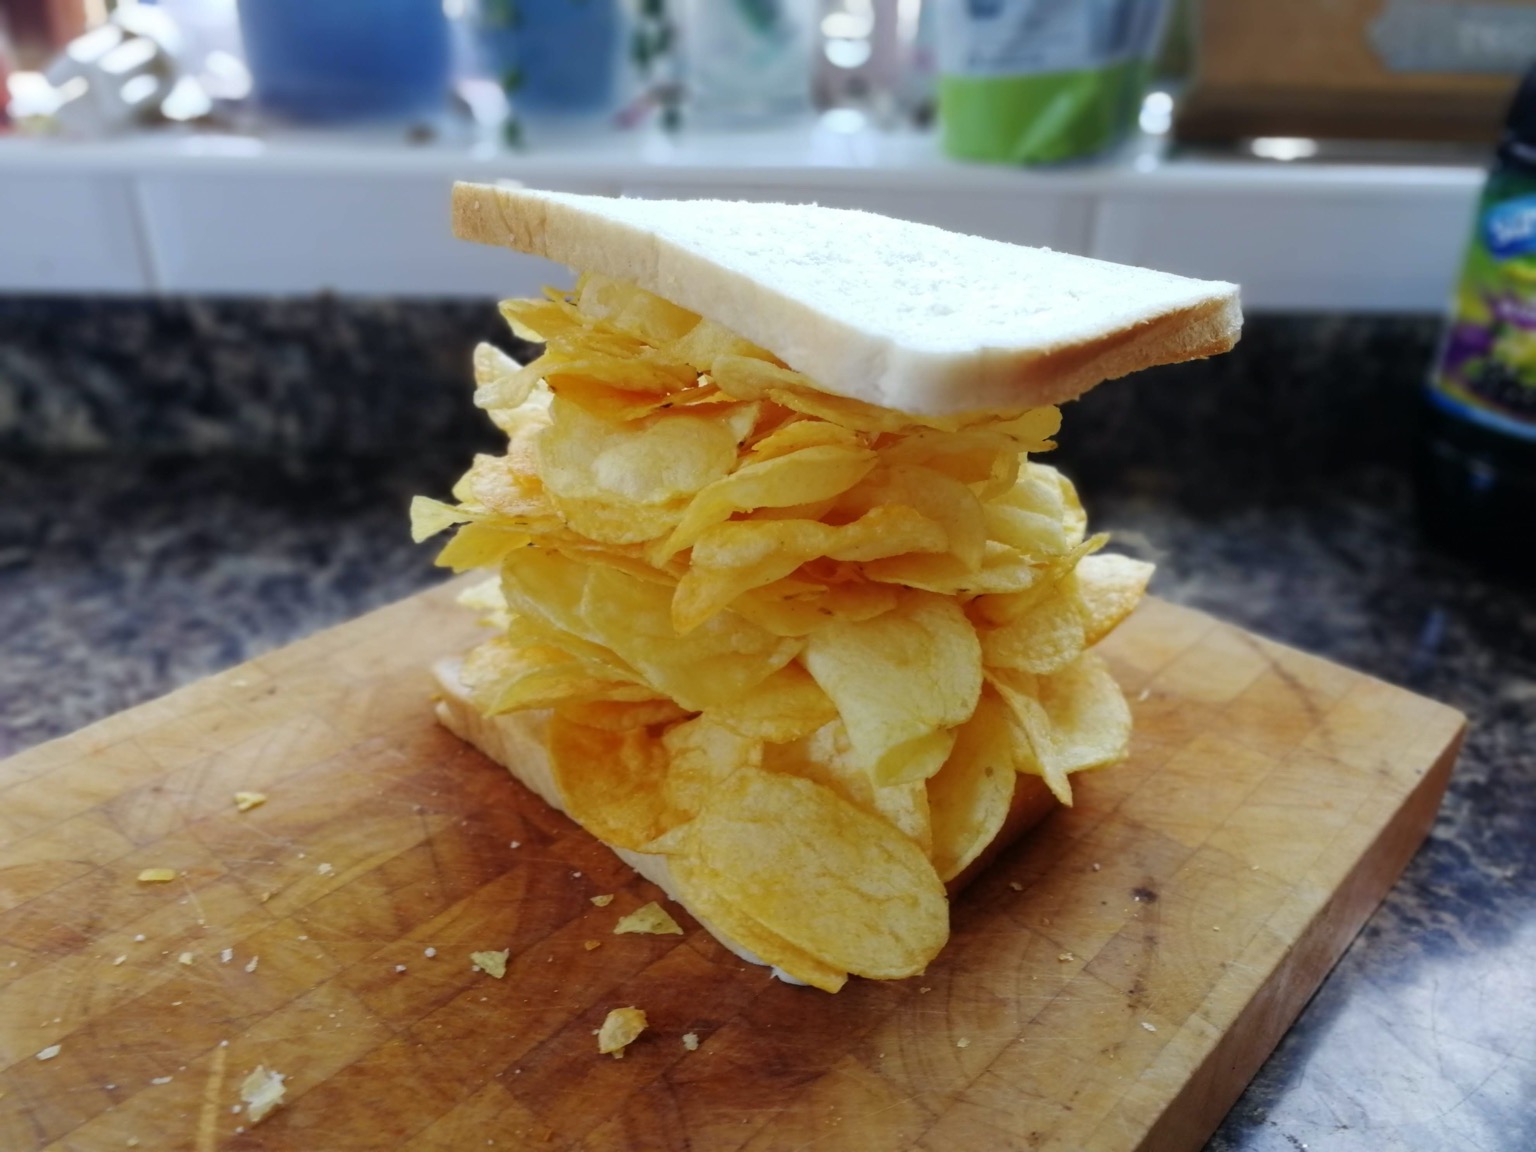 Sandwich filled with huge amount of crisps